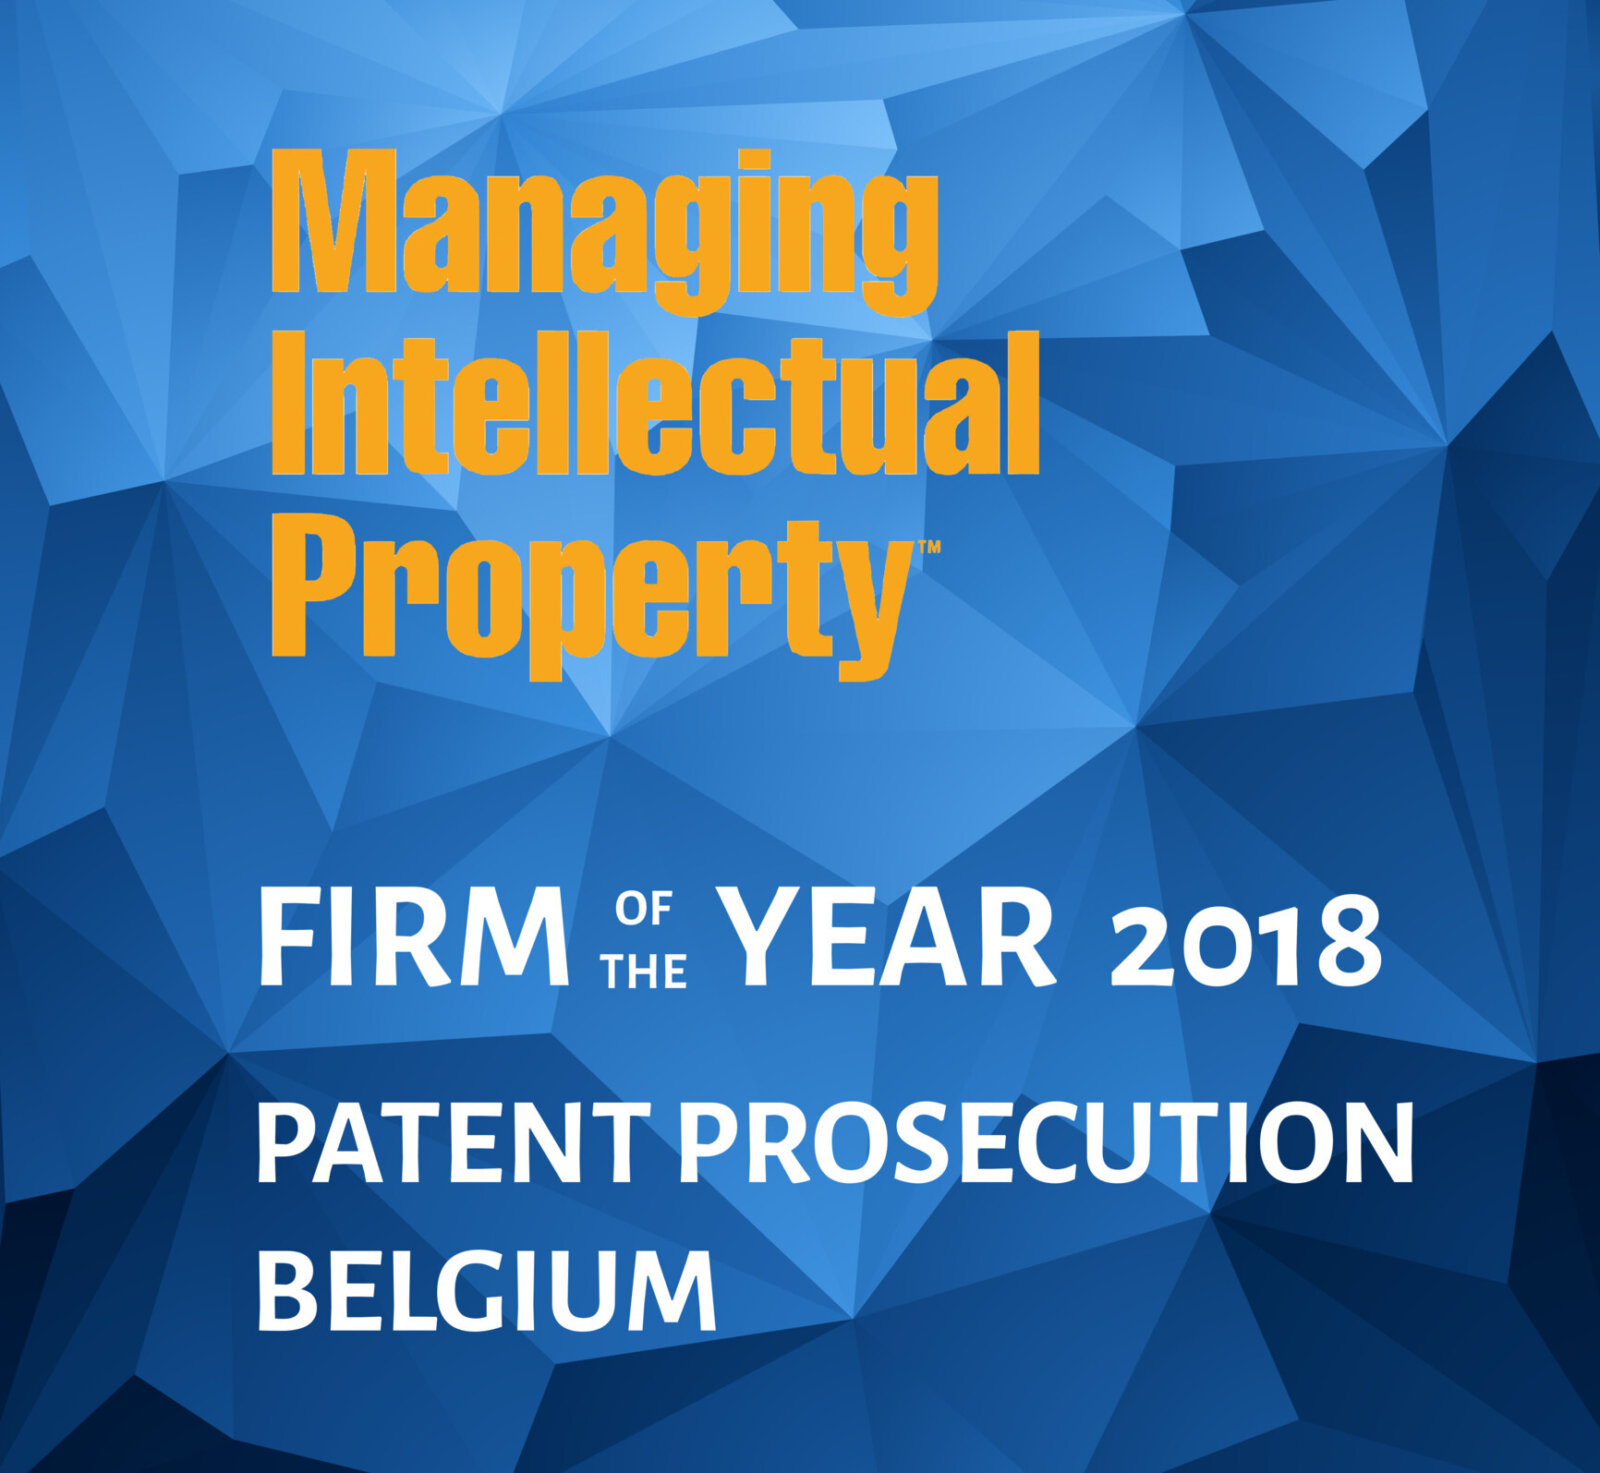 MIP Belgian Patent Prosecution Firm of the Year 2018!